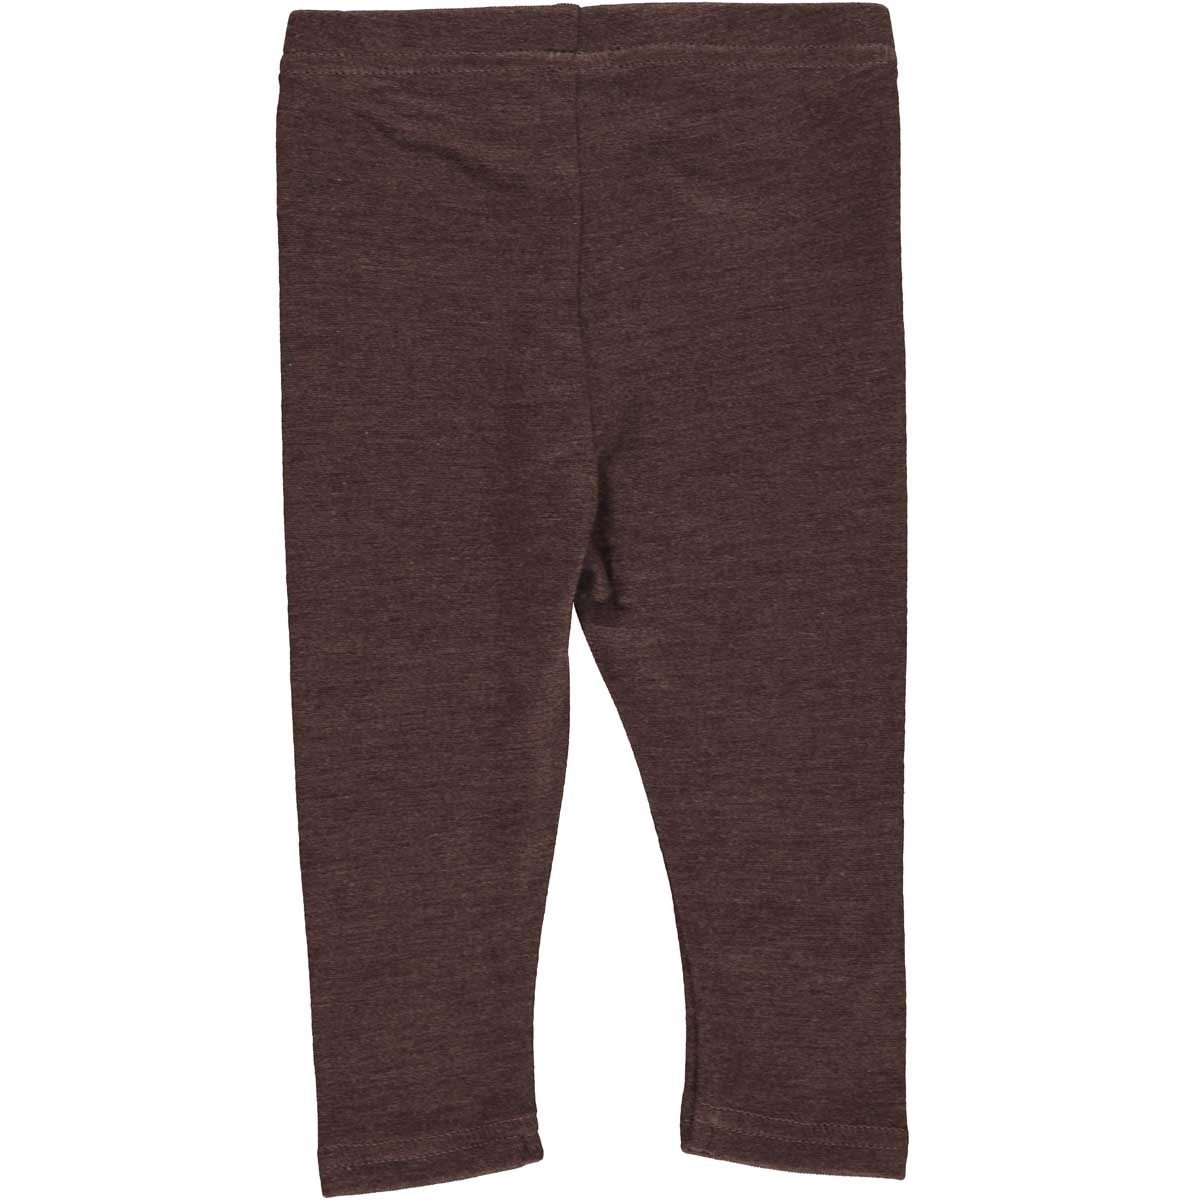 MAMA.LICIOUS Wolle baby-leggings -Coffee - 1533022500